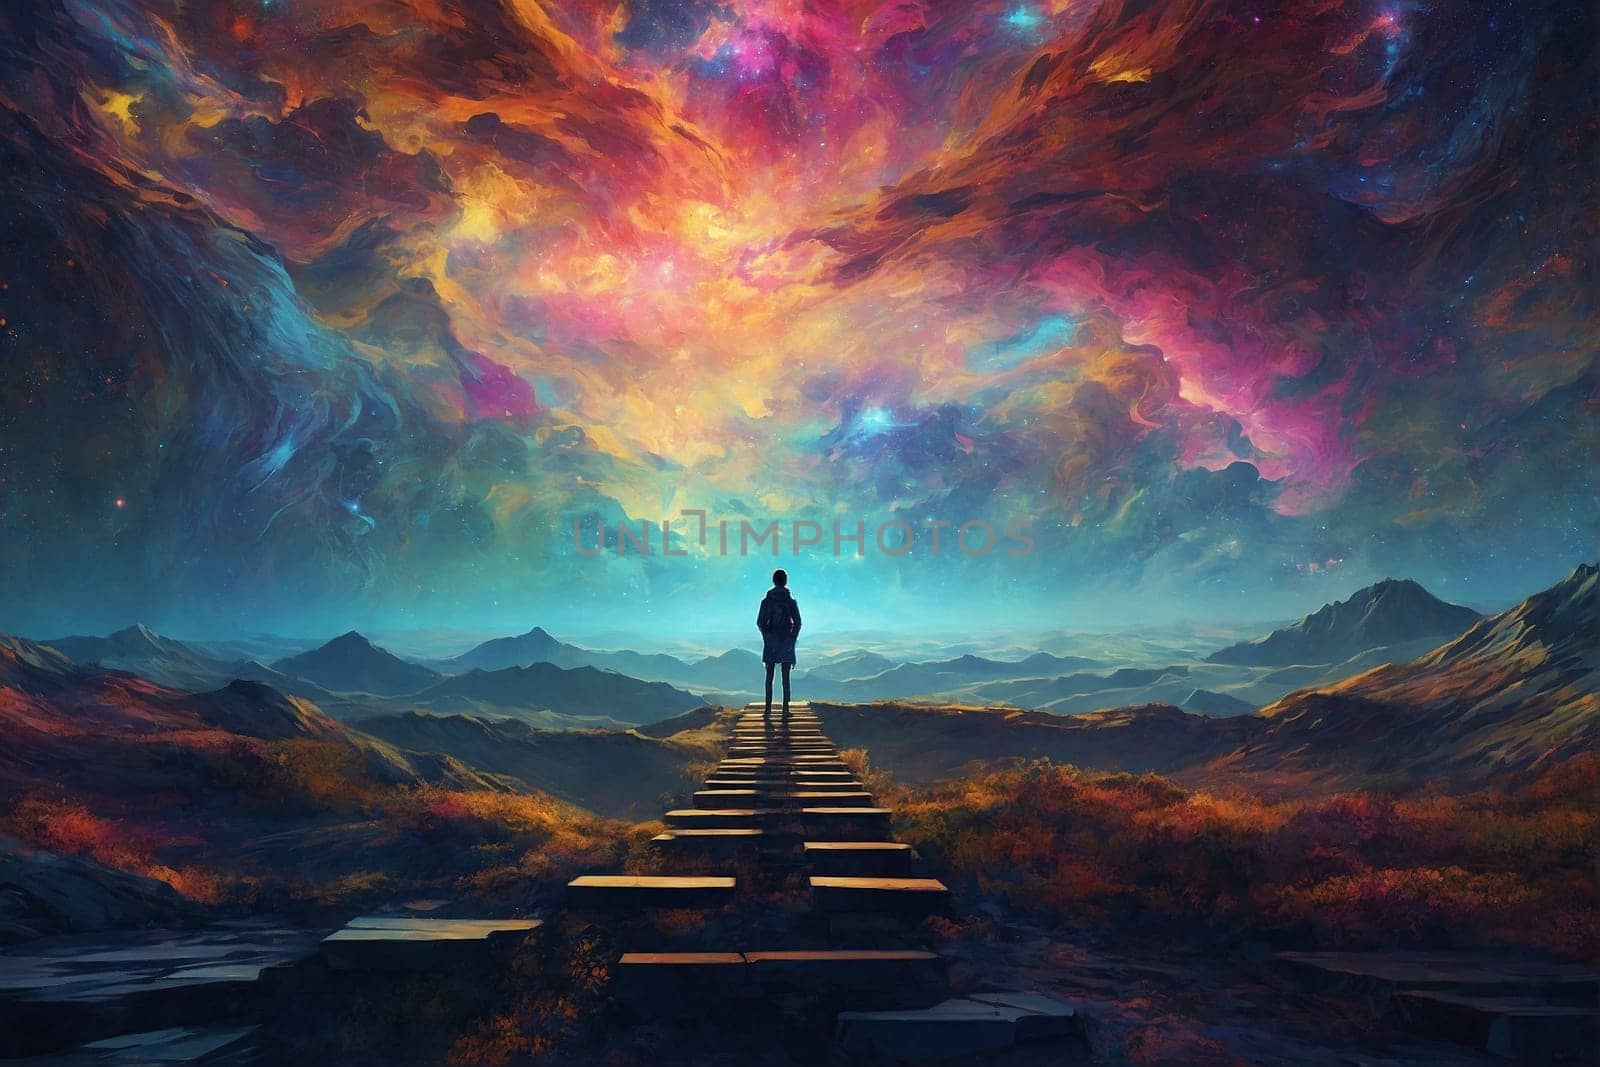 A person stands on a stairway, looking up at a sky filled with fluffy clouds.